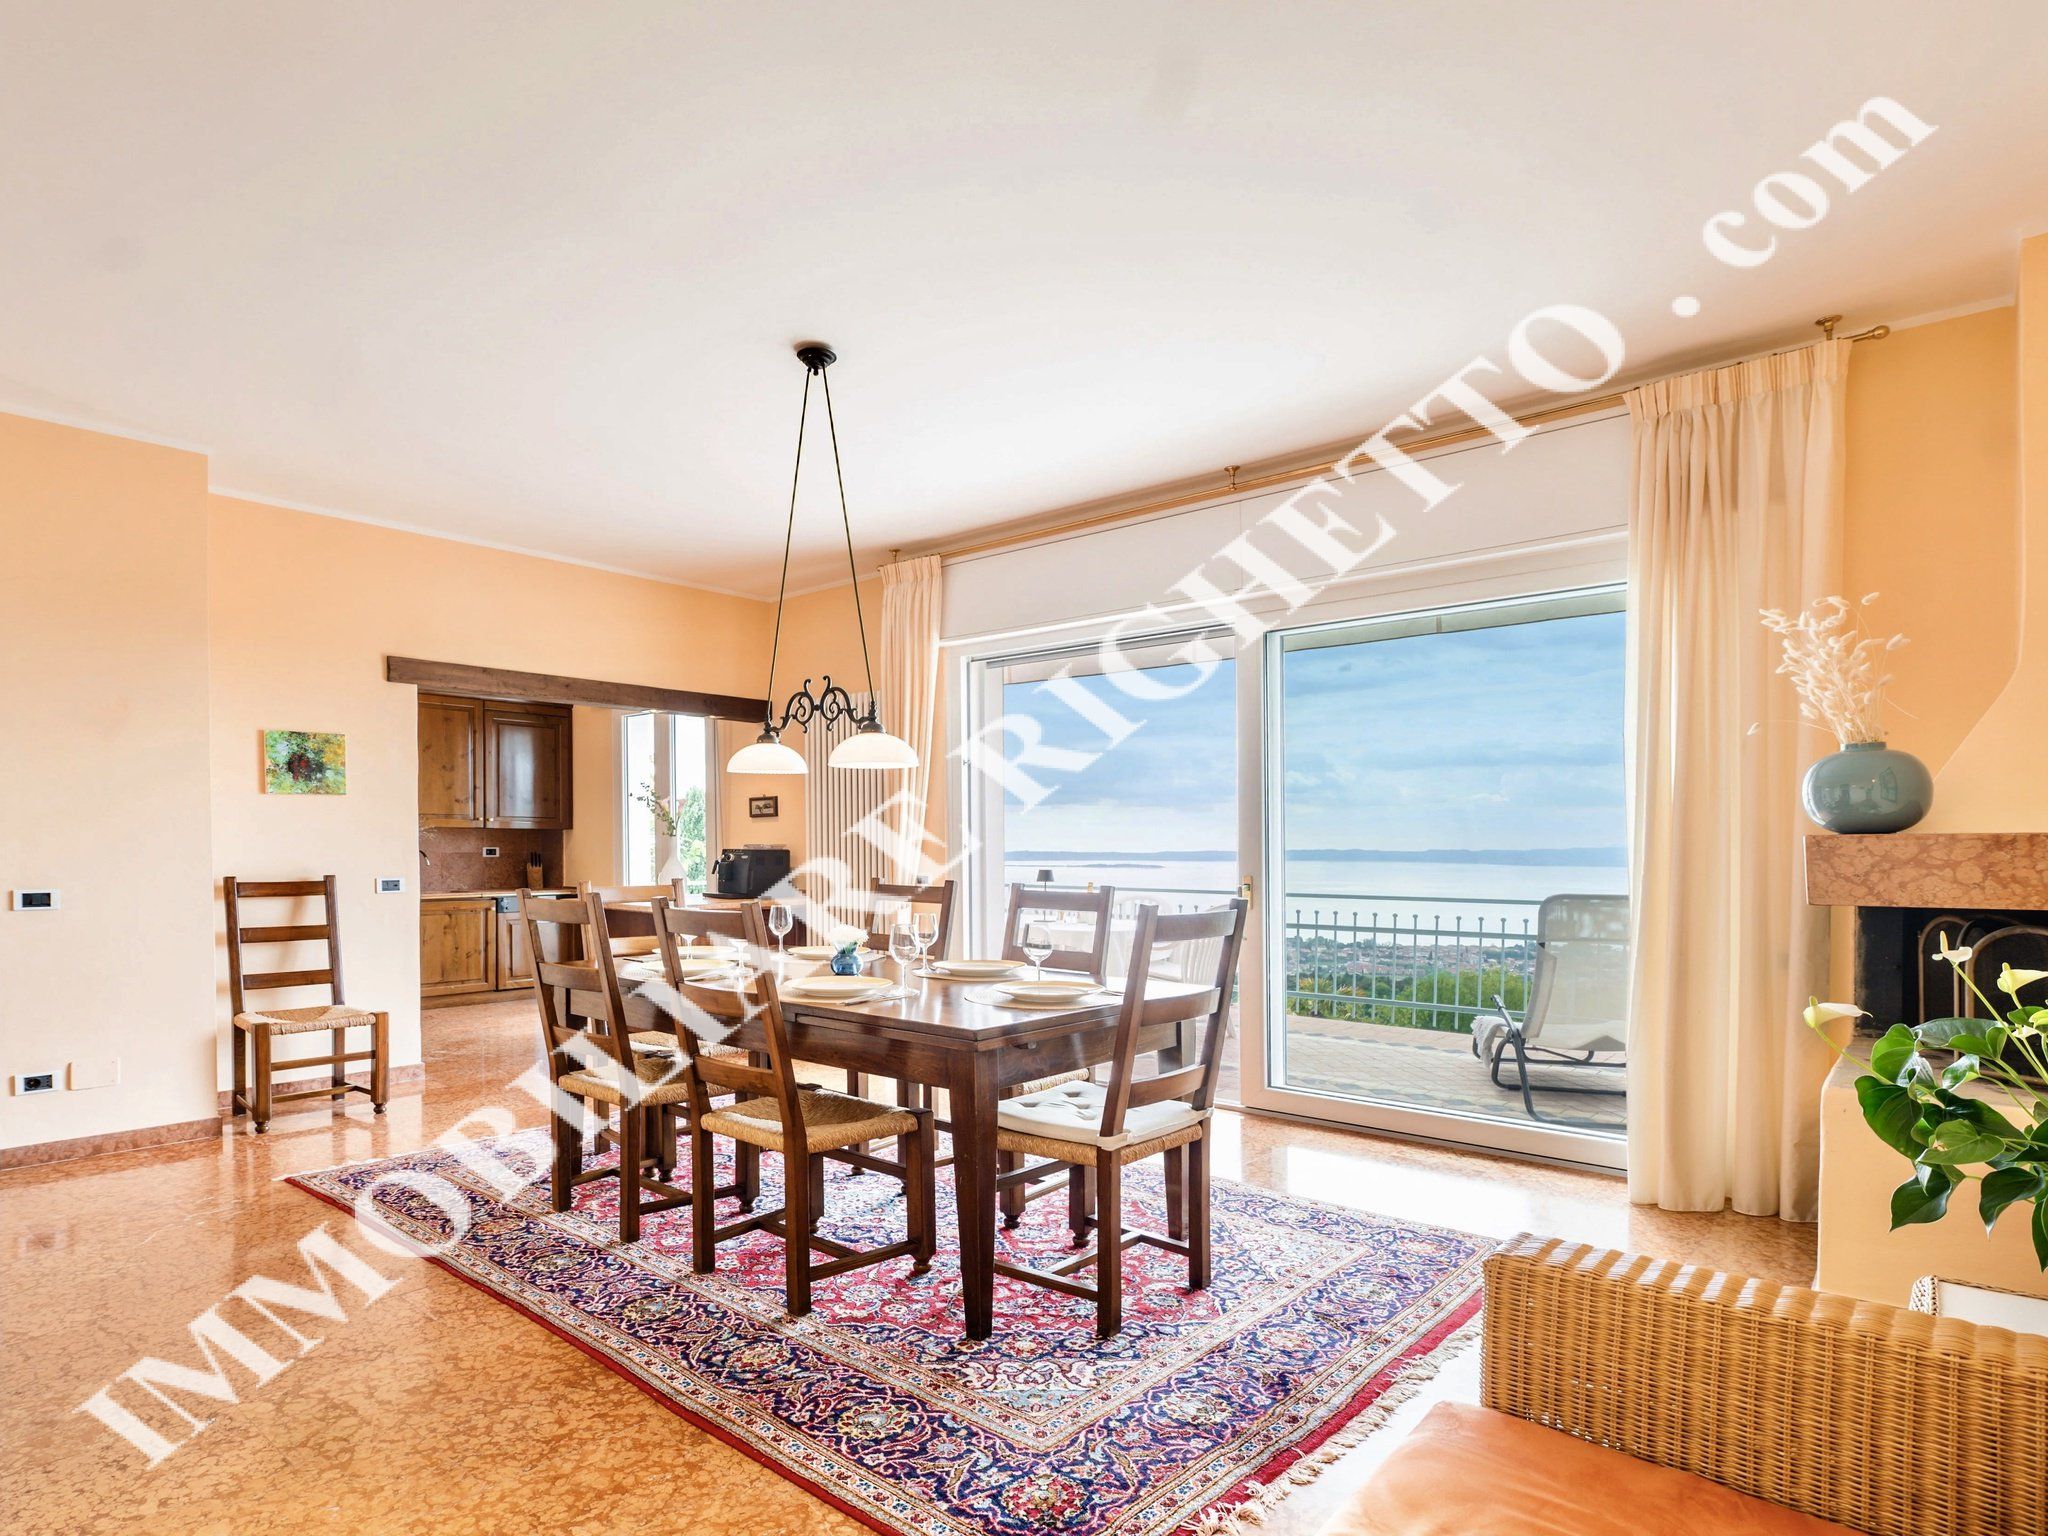 offer property for sale Magnificent detached villa with splendid 180° PANORAMIC VIEWS OF THE LAKE